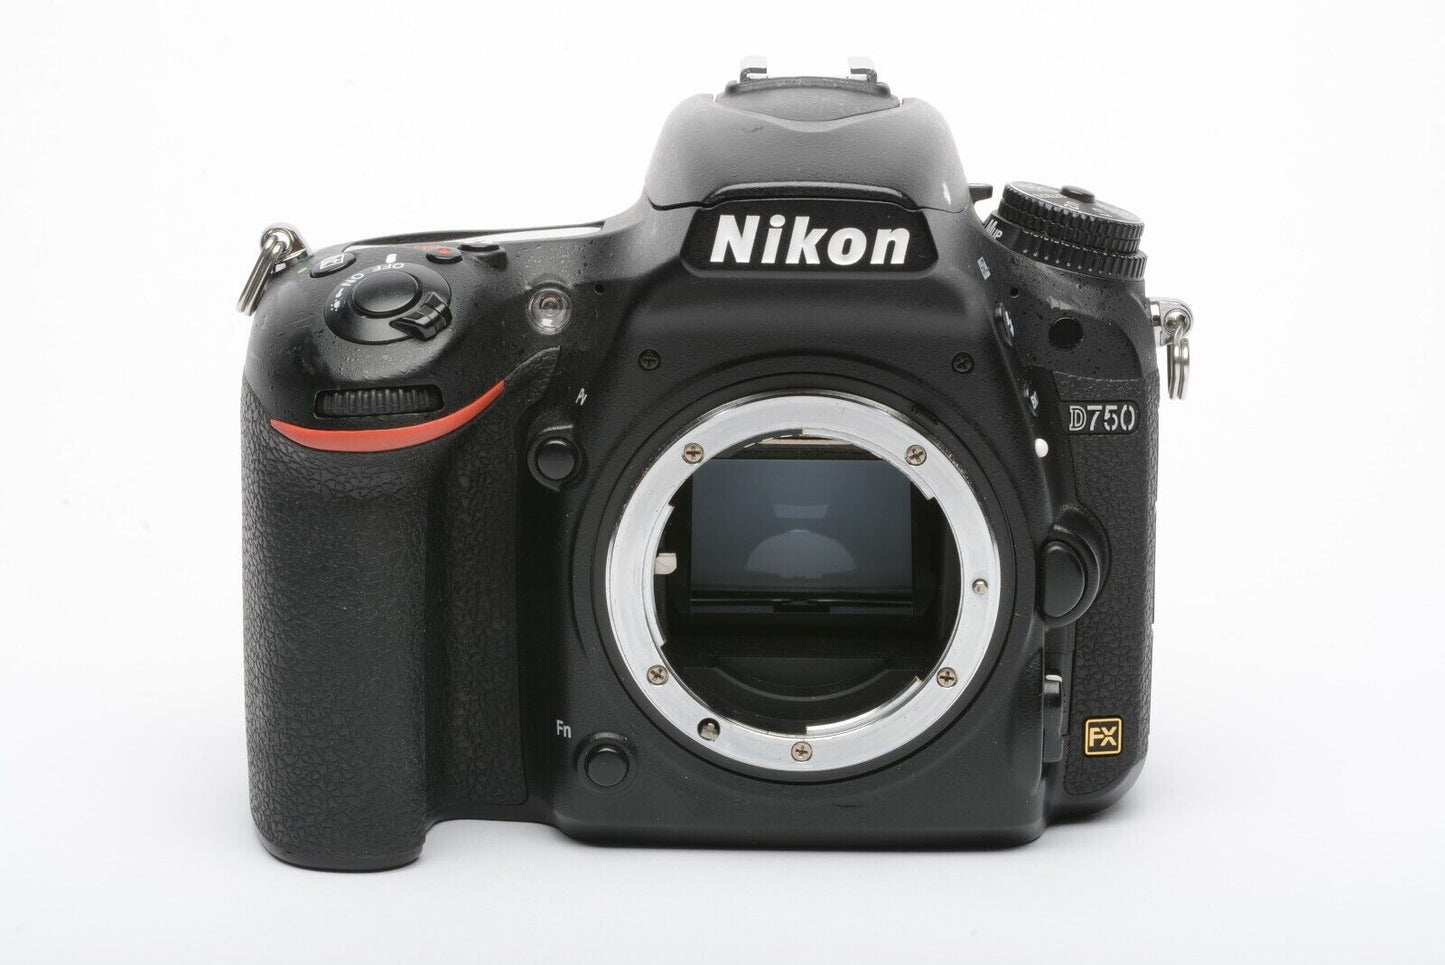 EXC++ NIKON D750 DSLR BODY 24.3MP, BATT+CHARGER+STRAP 34,422 ACTS, NICE! TESTED